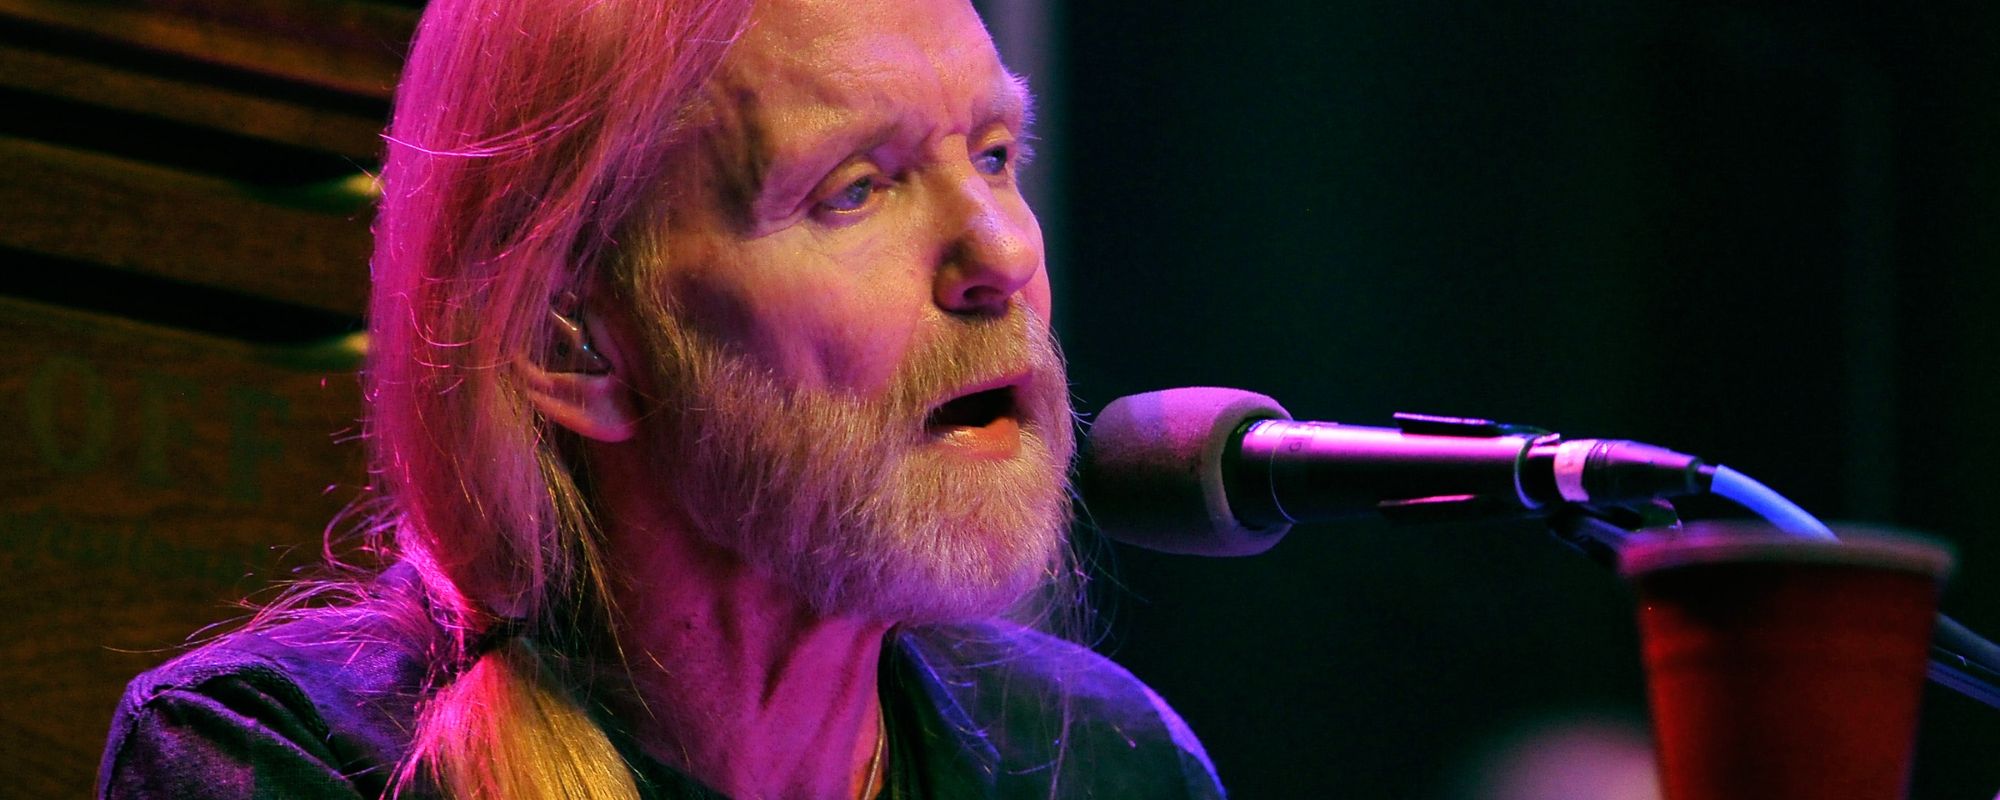 Gregg Allman’s Rock and Roll Hall of Fame Induction Marked a Devastating All-Time Low Instead of a Career High